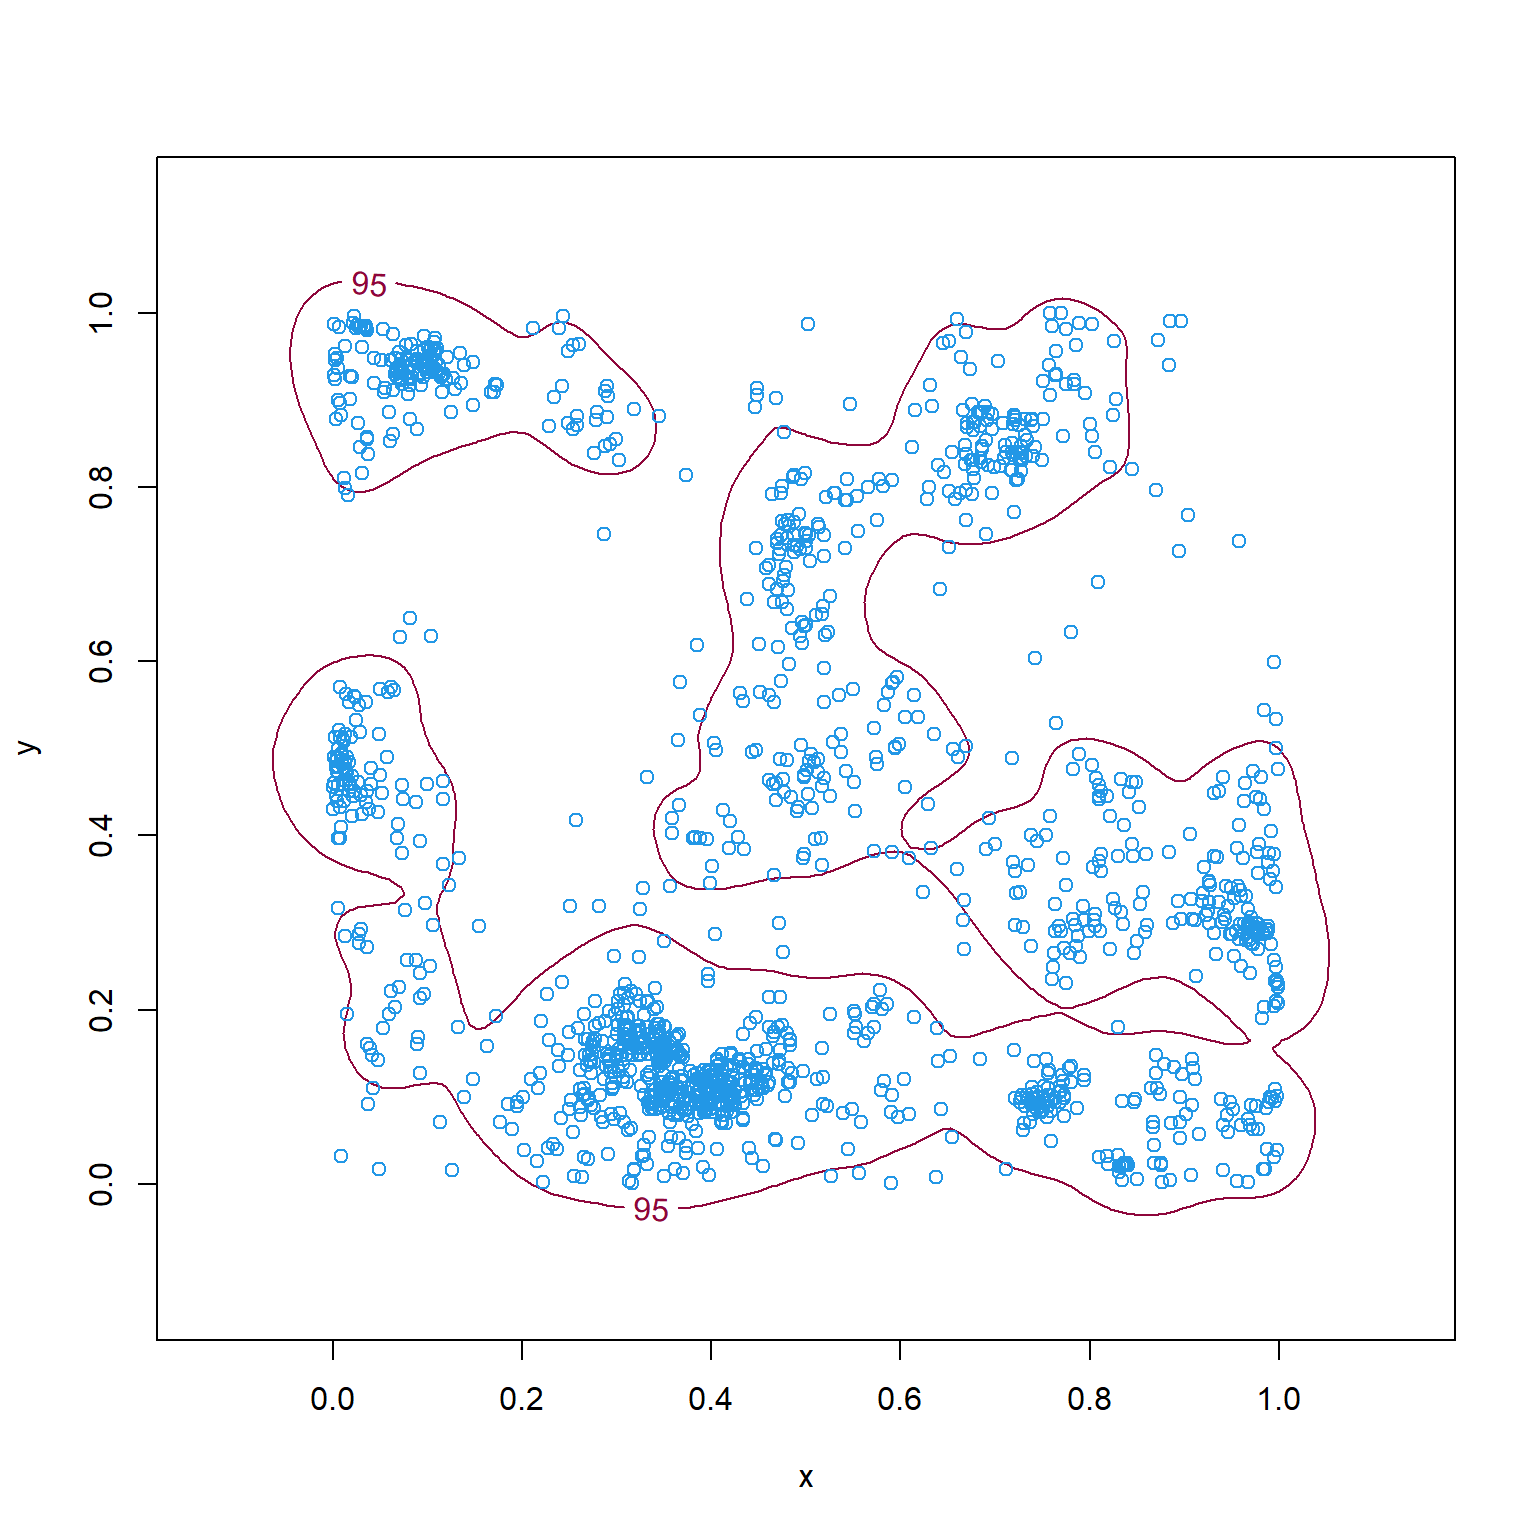 Minimum convex polygon (left) and 95th percentile isopleth of a kernel density estimate of $f_u(s)$ (right) for the simulated point pattern data in Chapter 3.